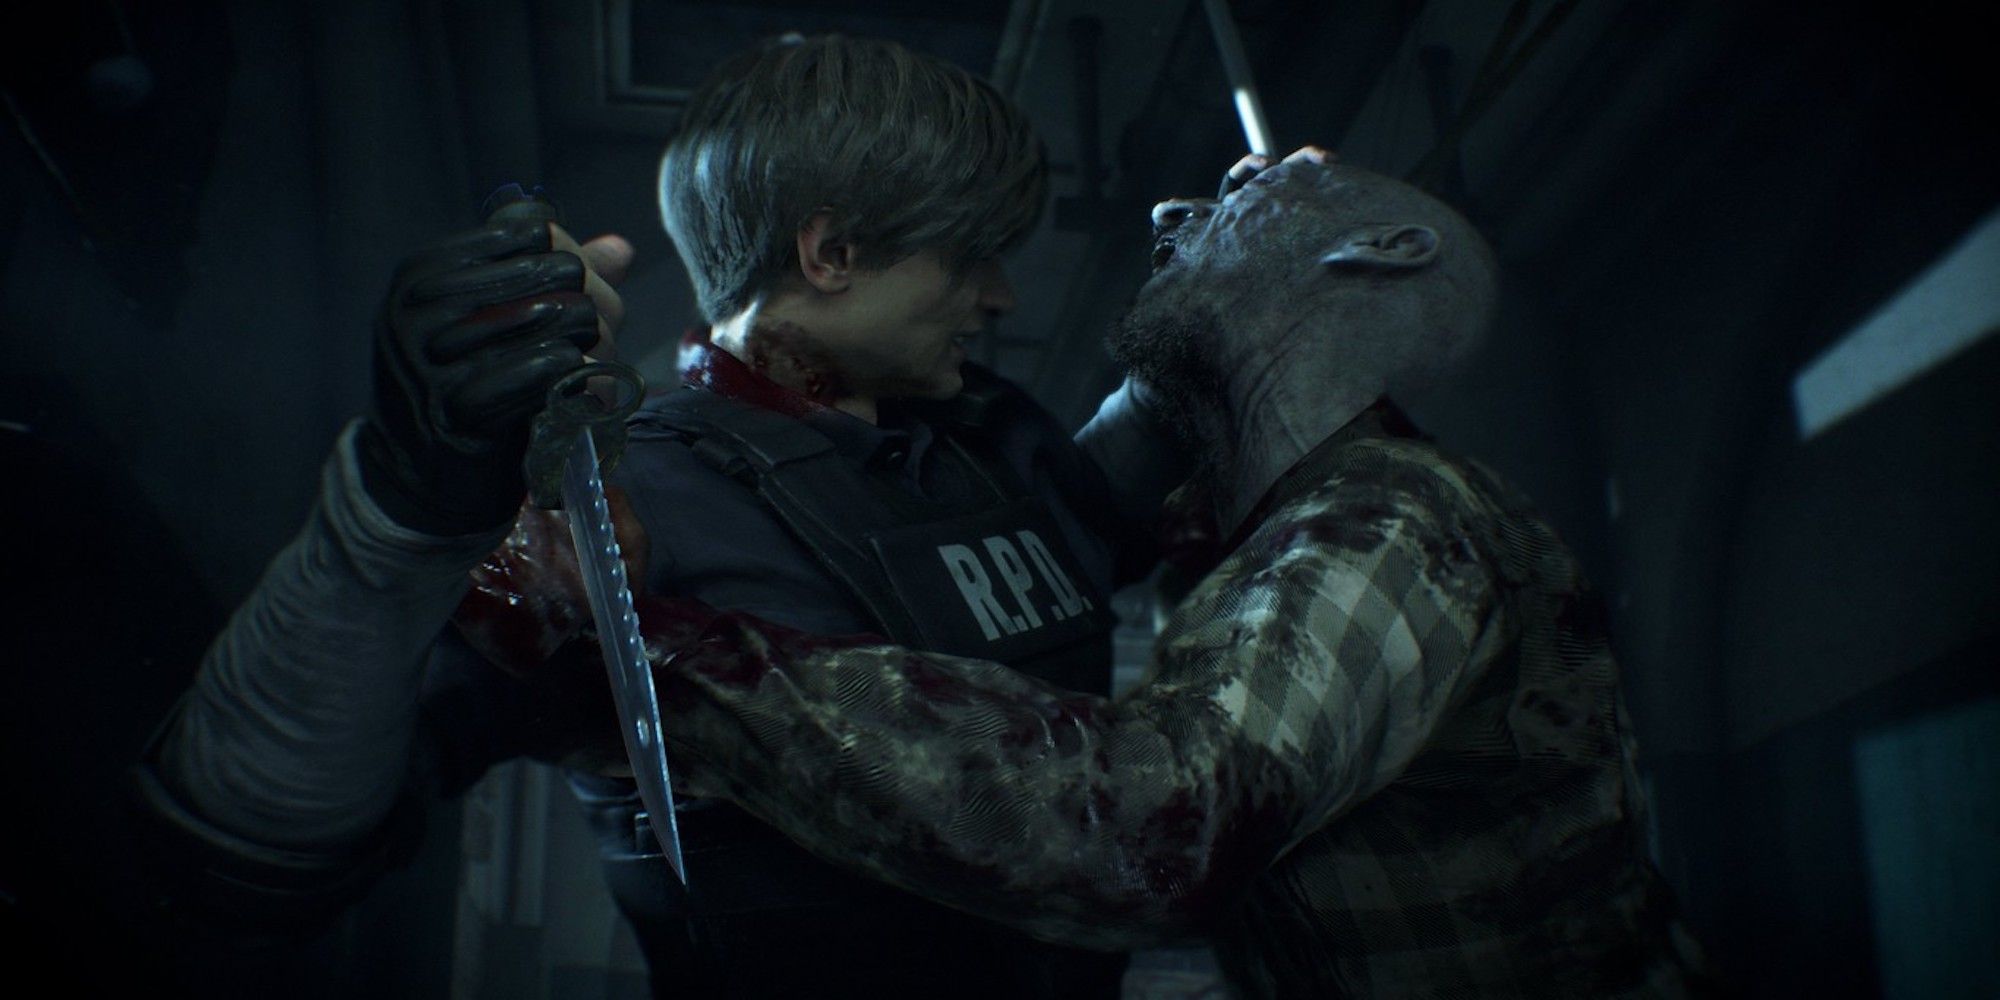 Leon fighting an enemy with a knife (Resident Evil 2)